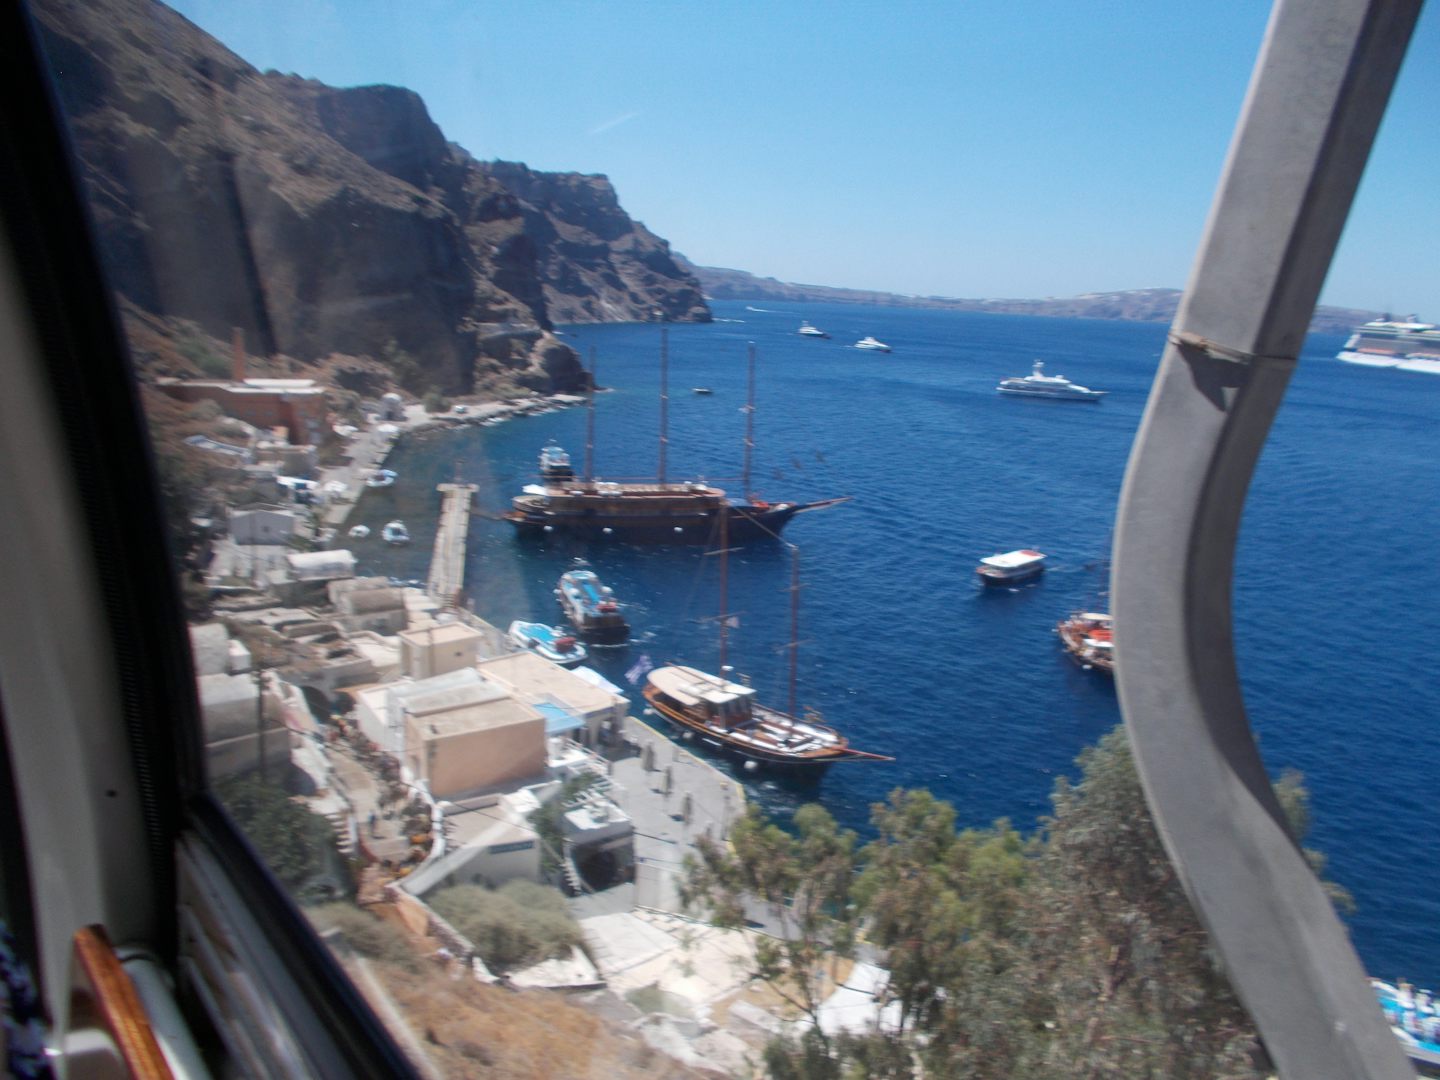 view from the cable car at Santorini.